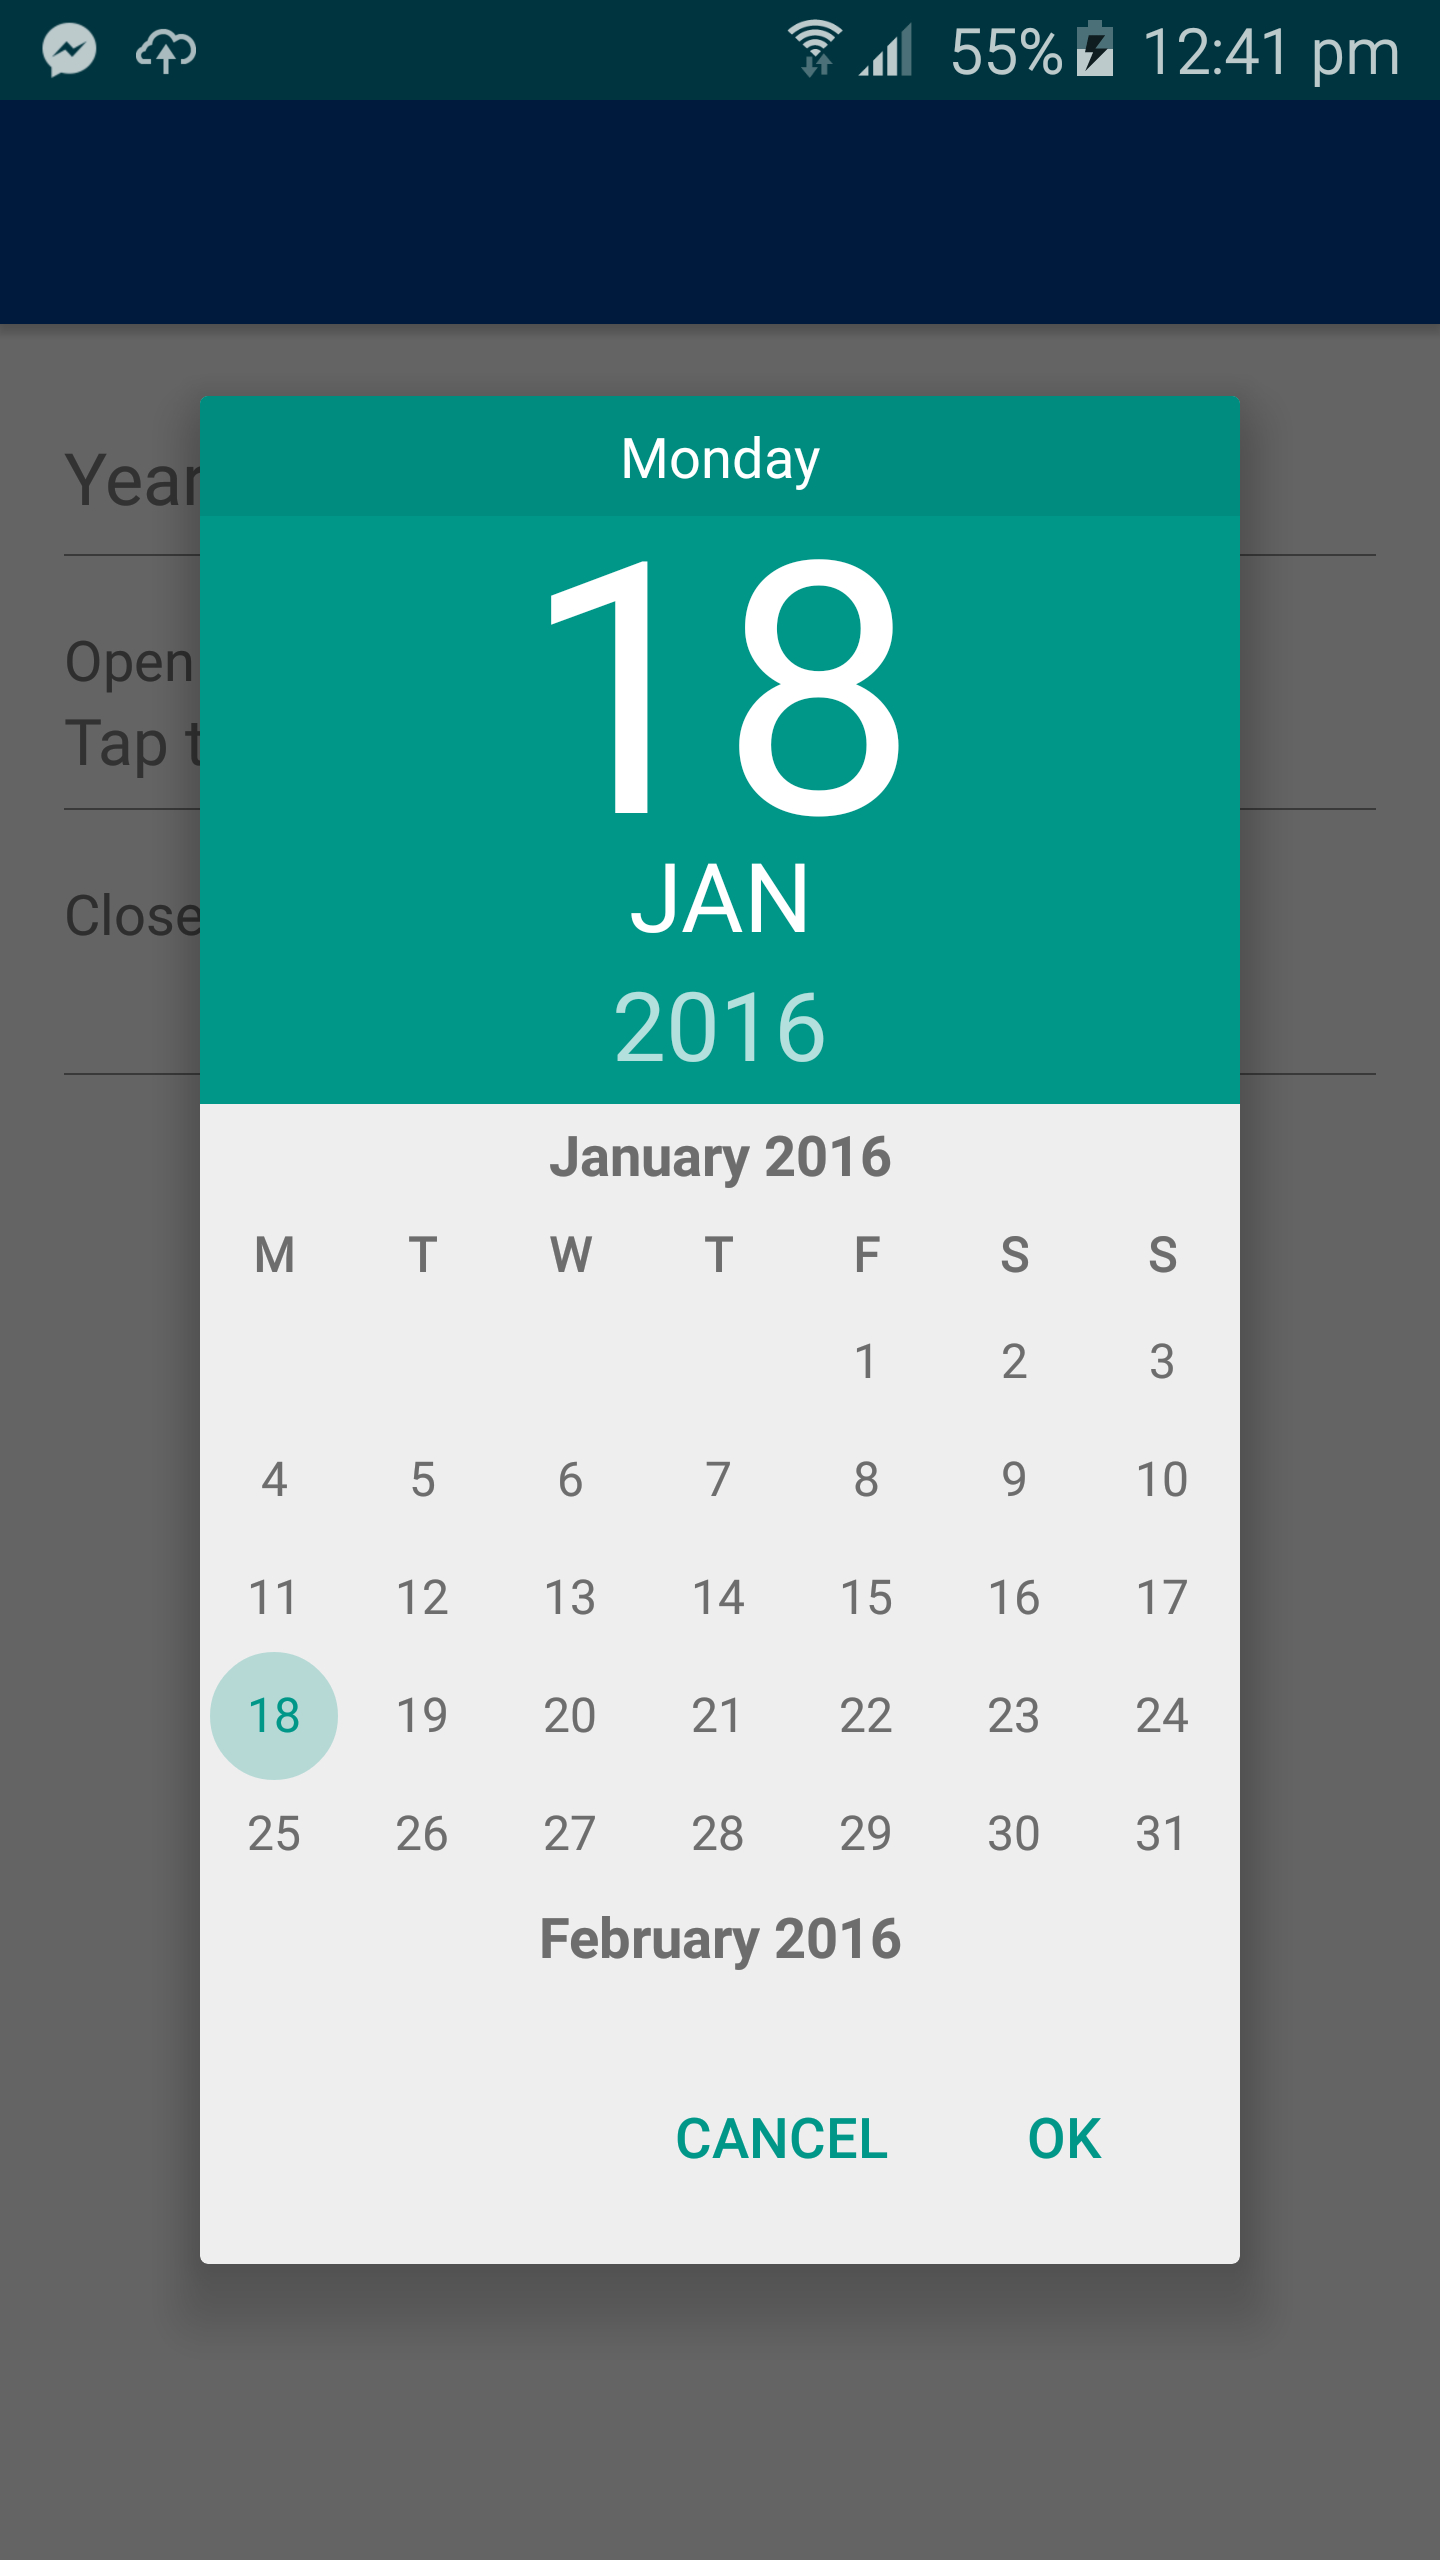 Android  Dateformat Produce Wrong Year  Stack Overflow within Range Picker Android